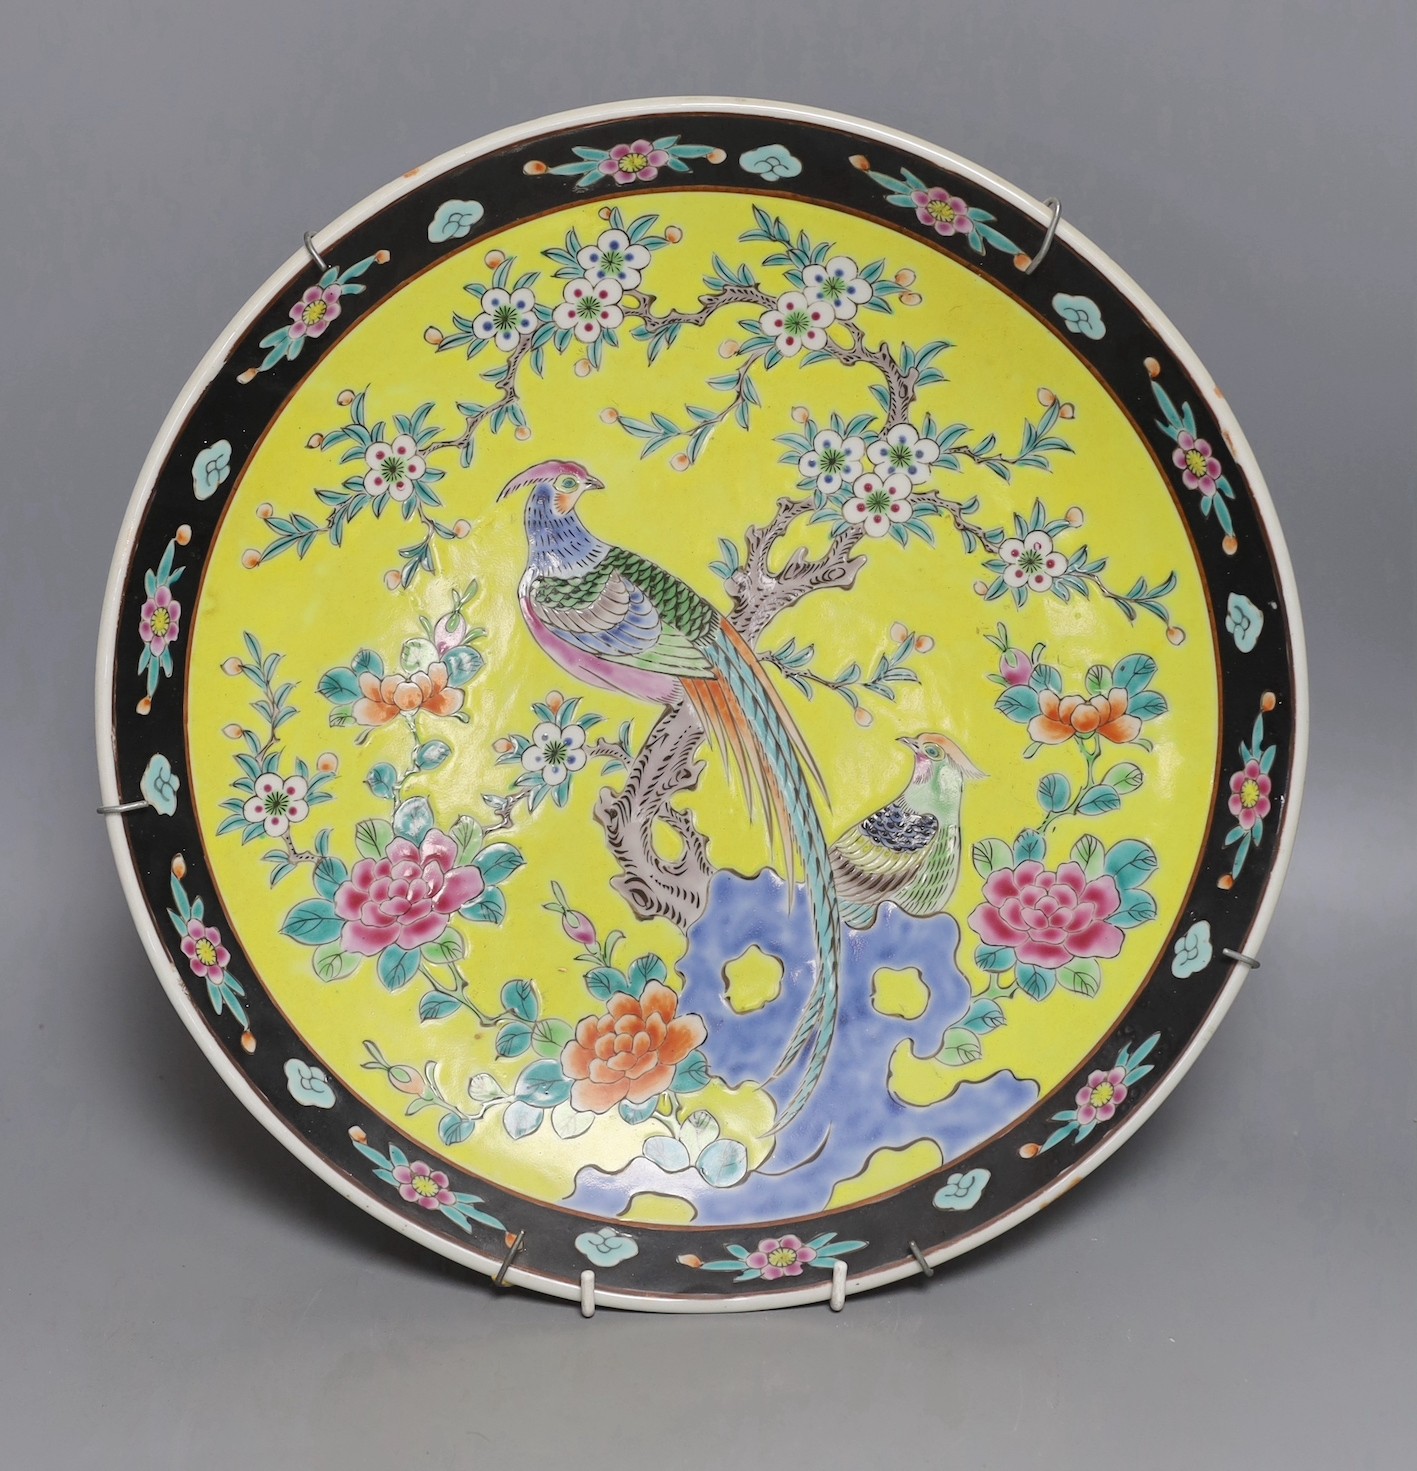 An early 20th century Japanese yellow ground dish with bird and floral decoration - 36.5cm diameter